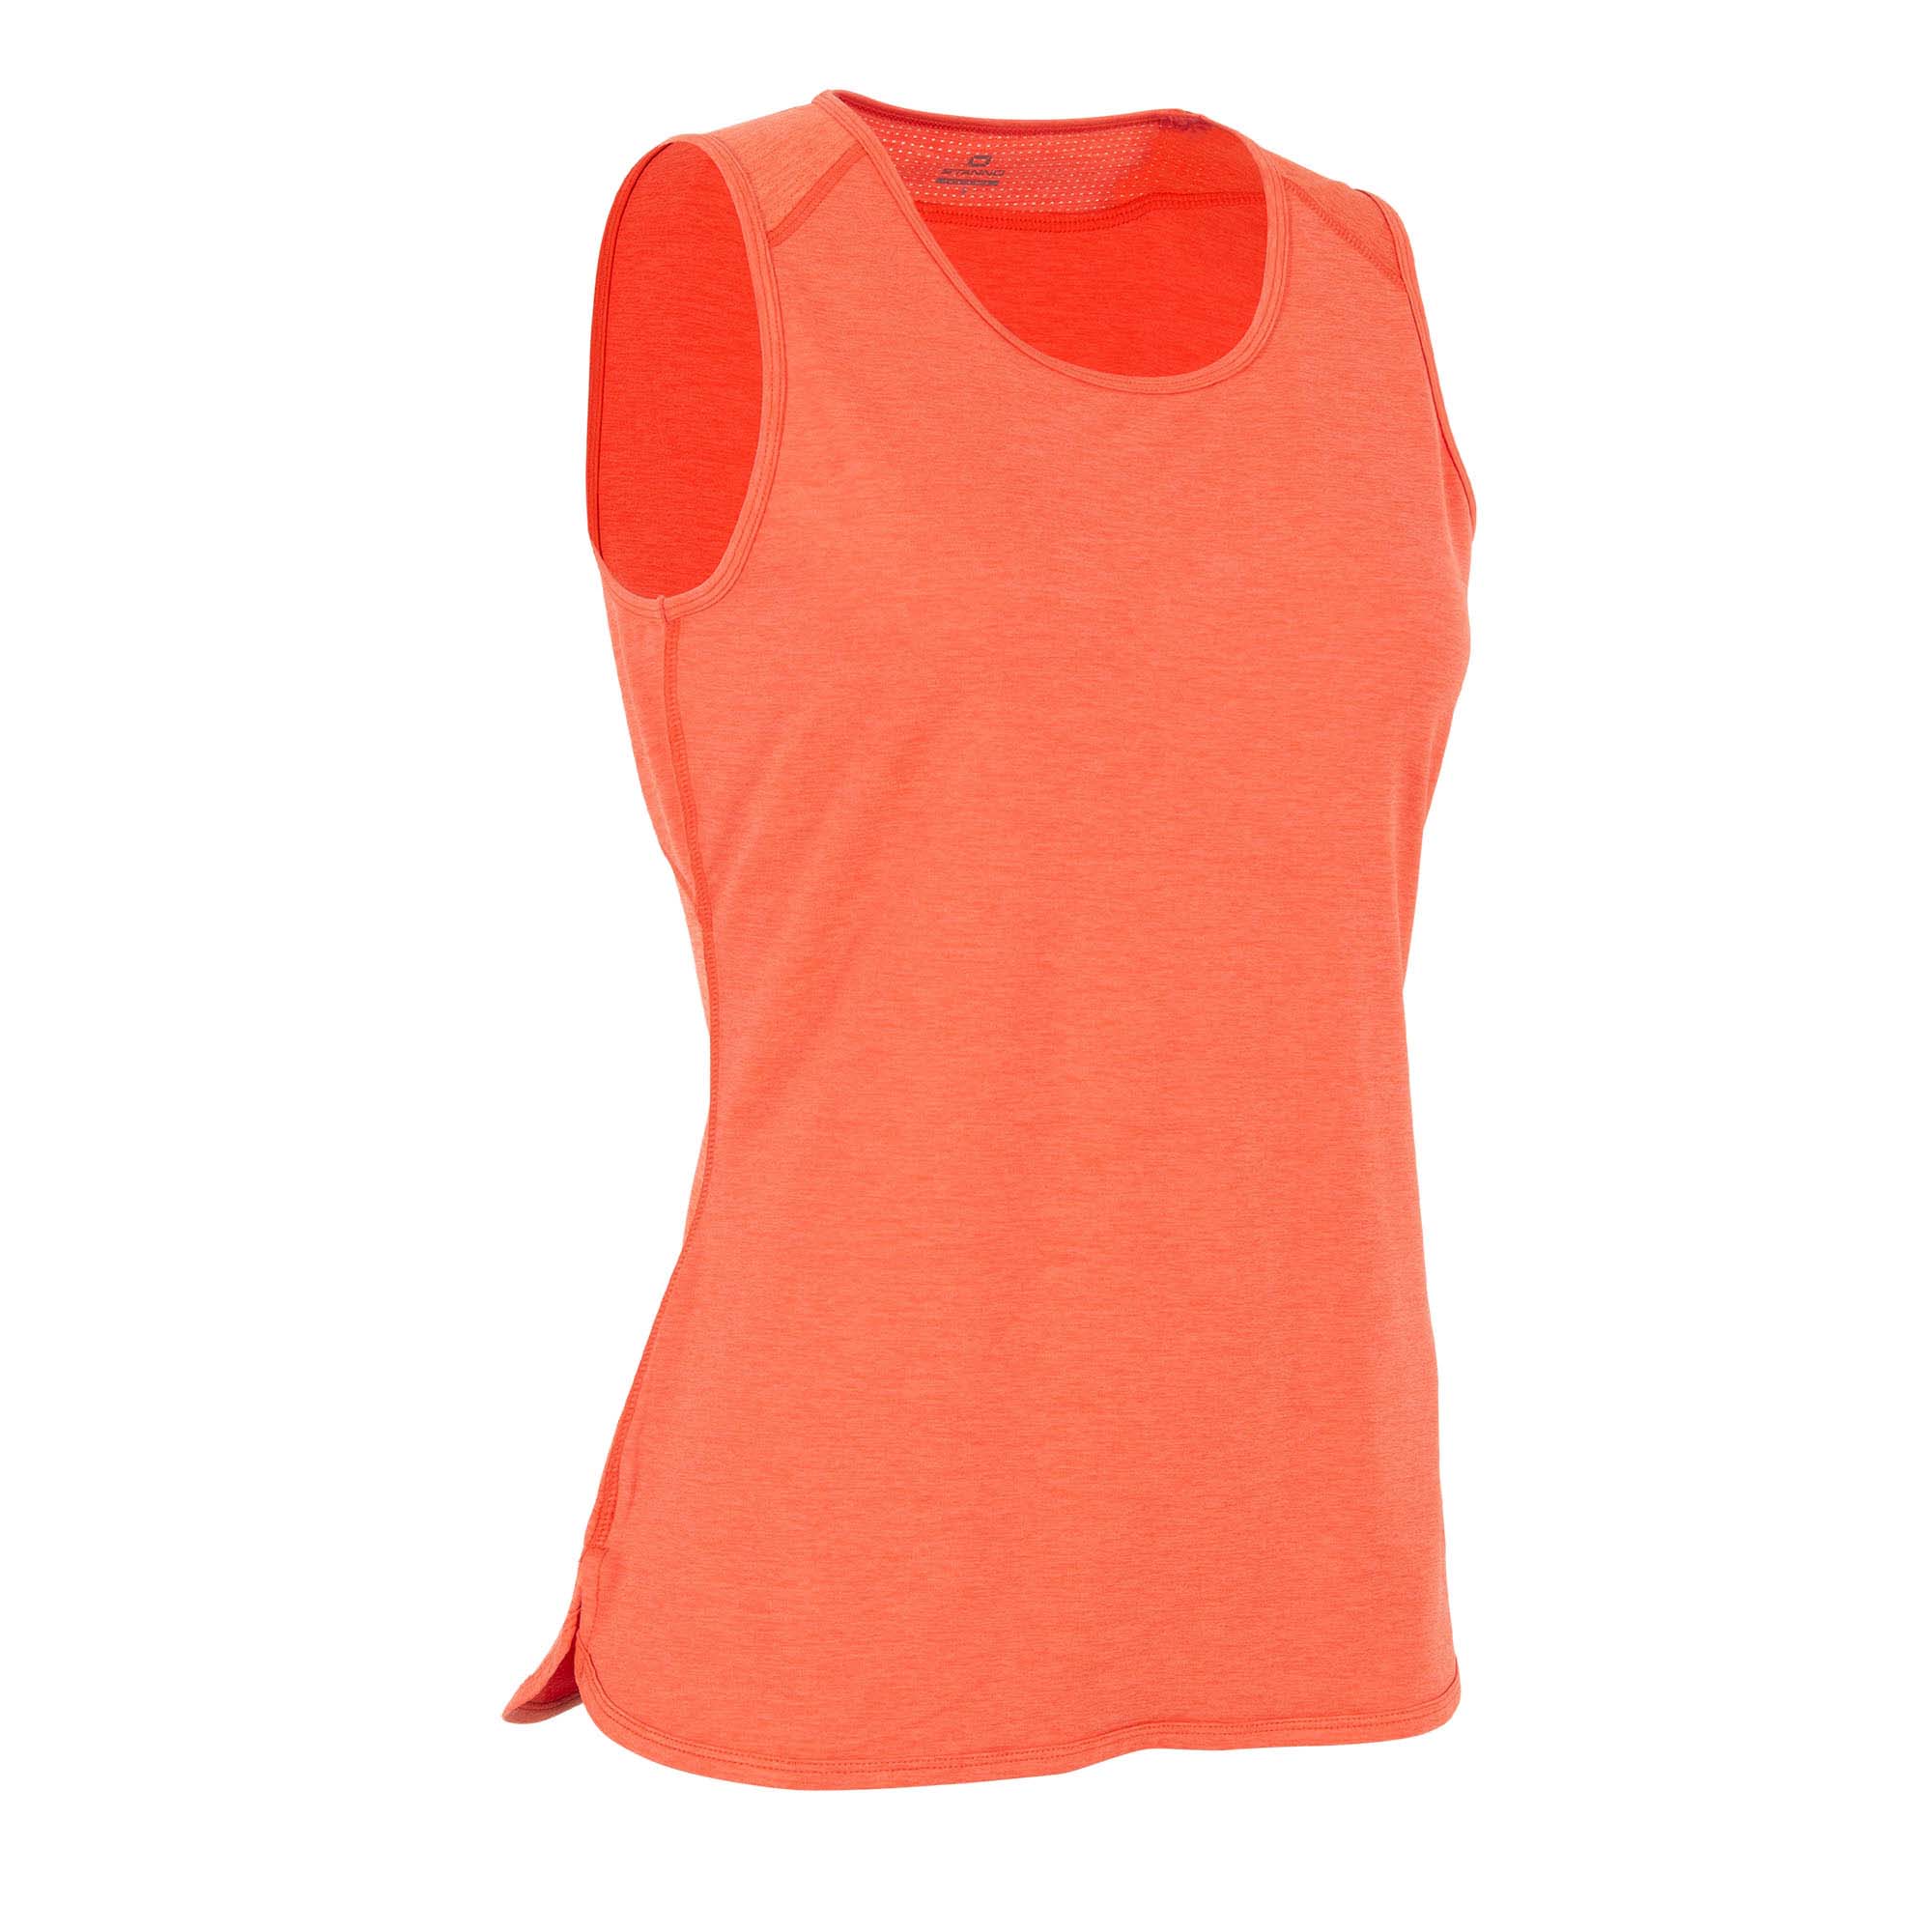 STANNO functionalsorkout tank ladies